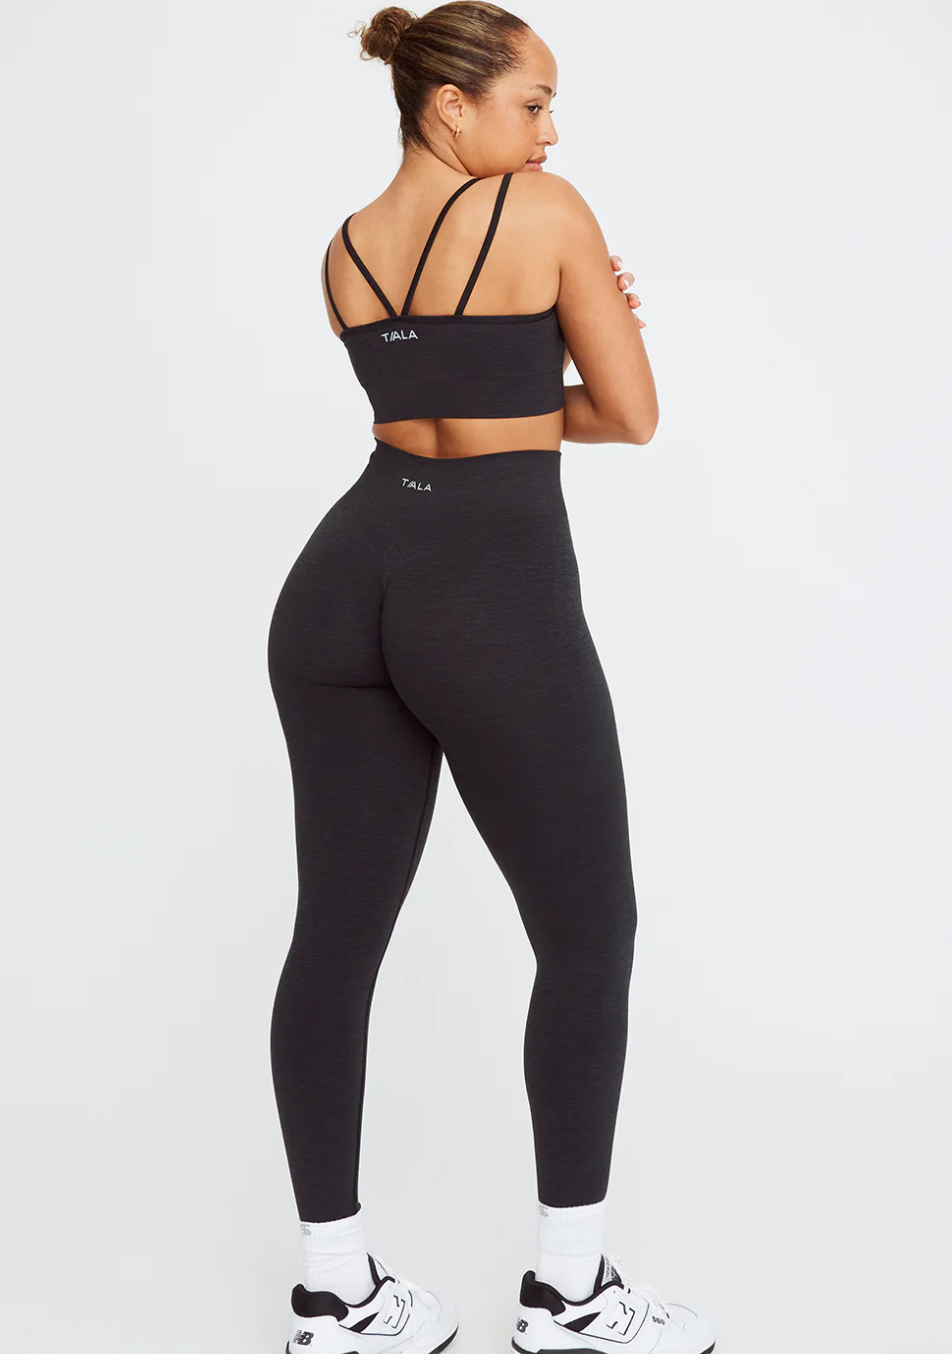 Lace-Up Back Sports Bra and Butt Lift Leggings Set in Black